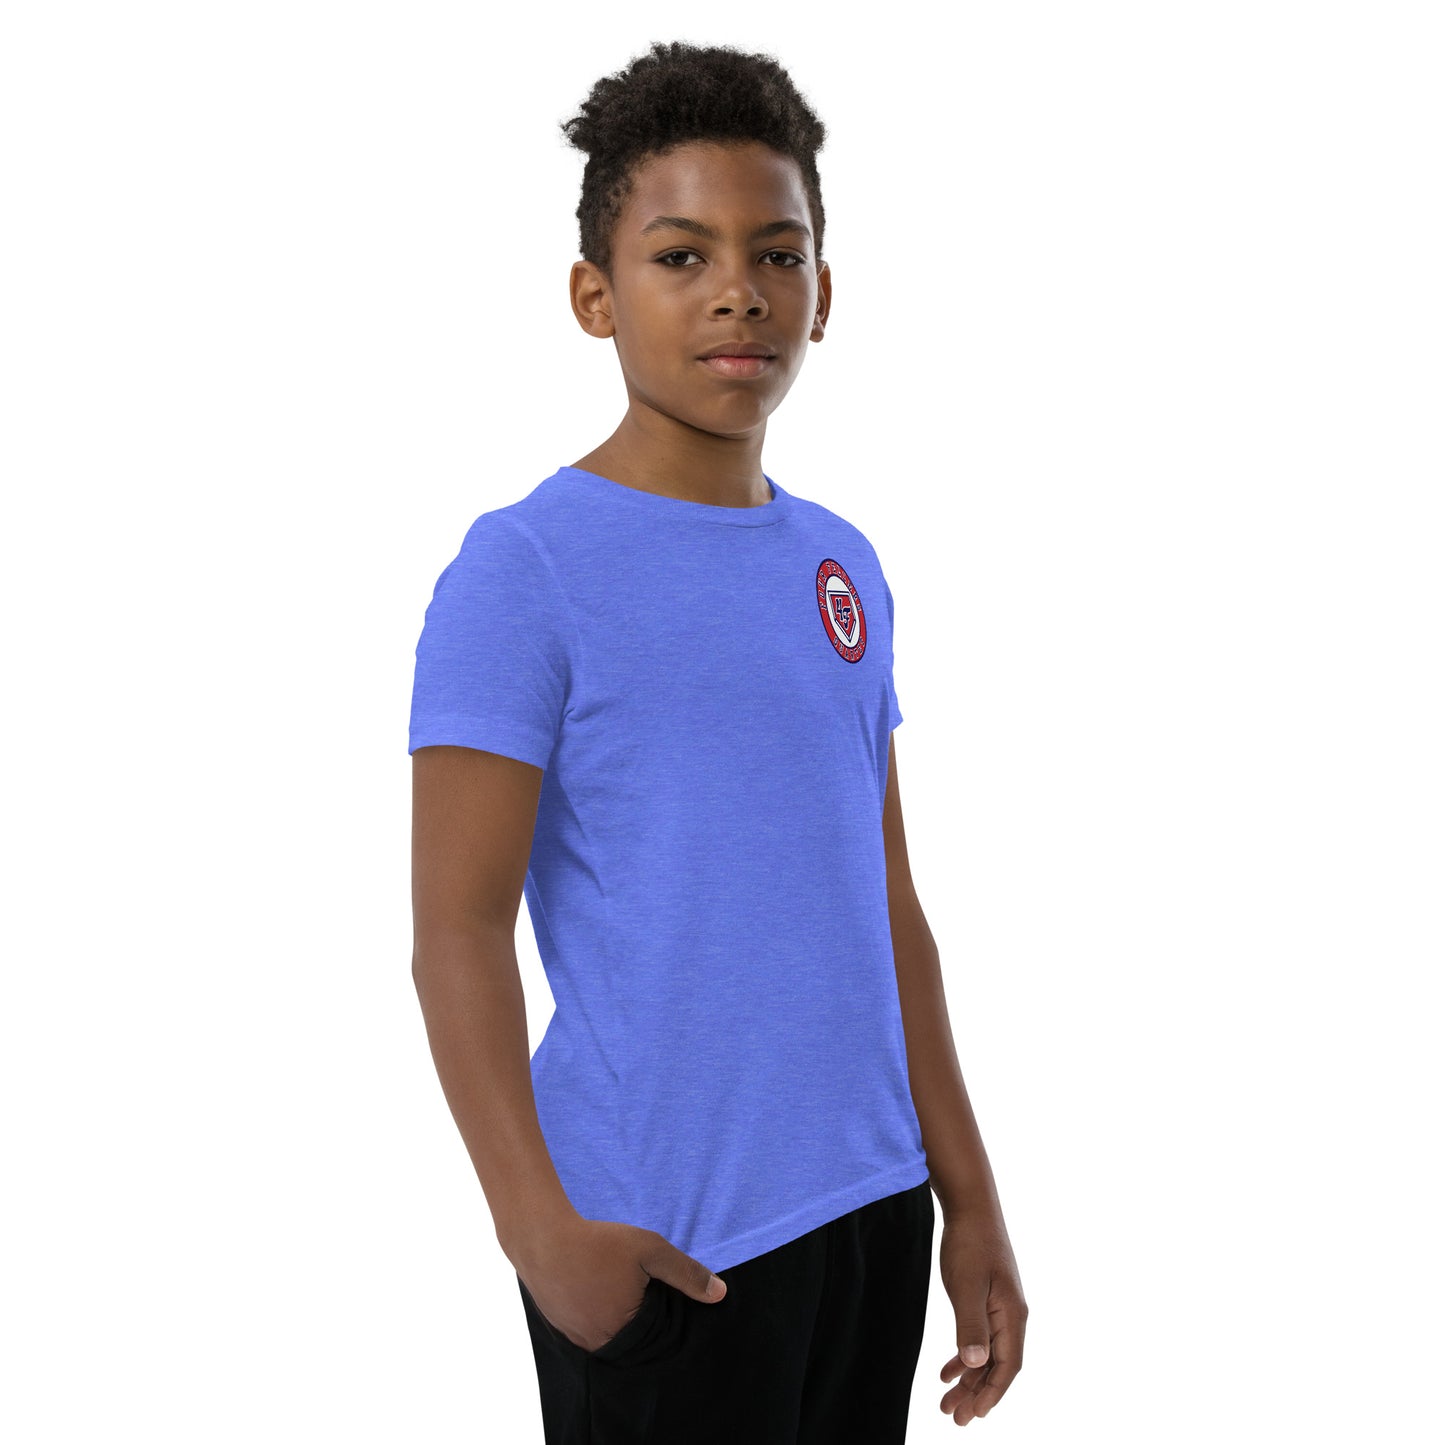 Four Fellers - Printed Youth Short Sleeve T-Shirt